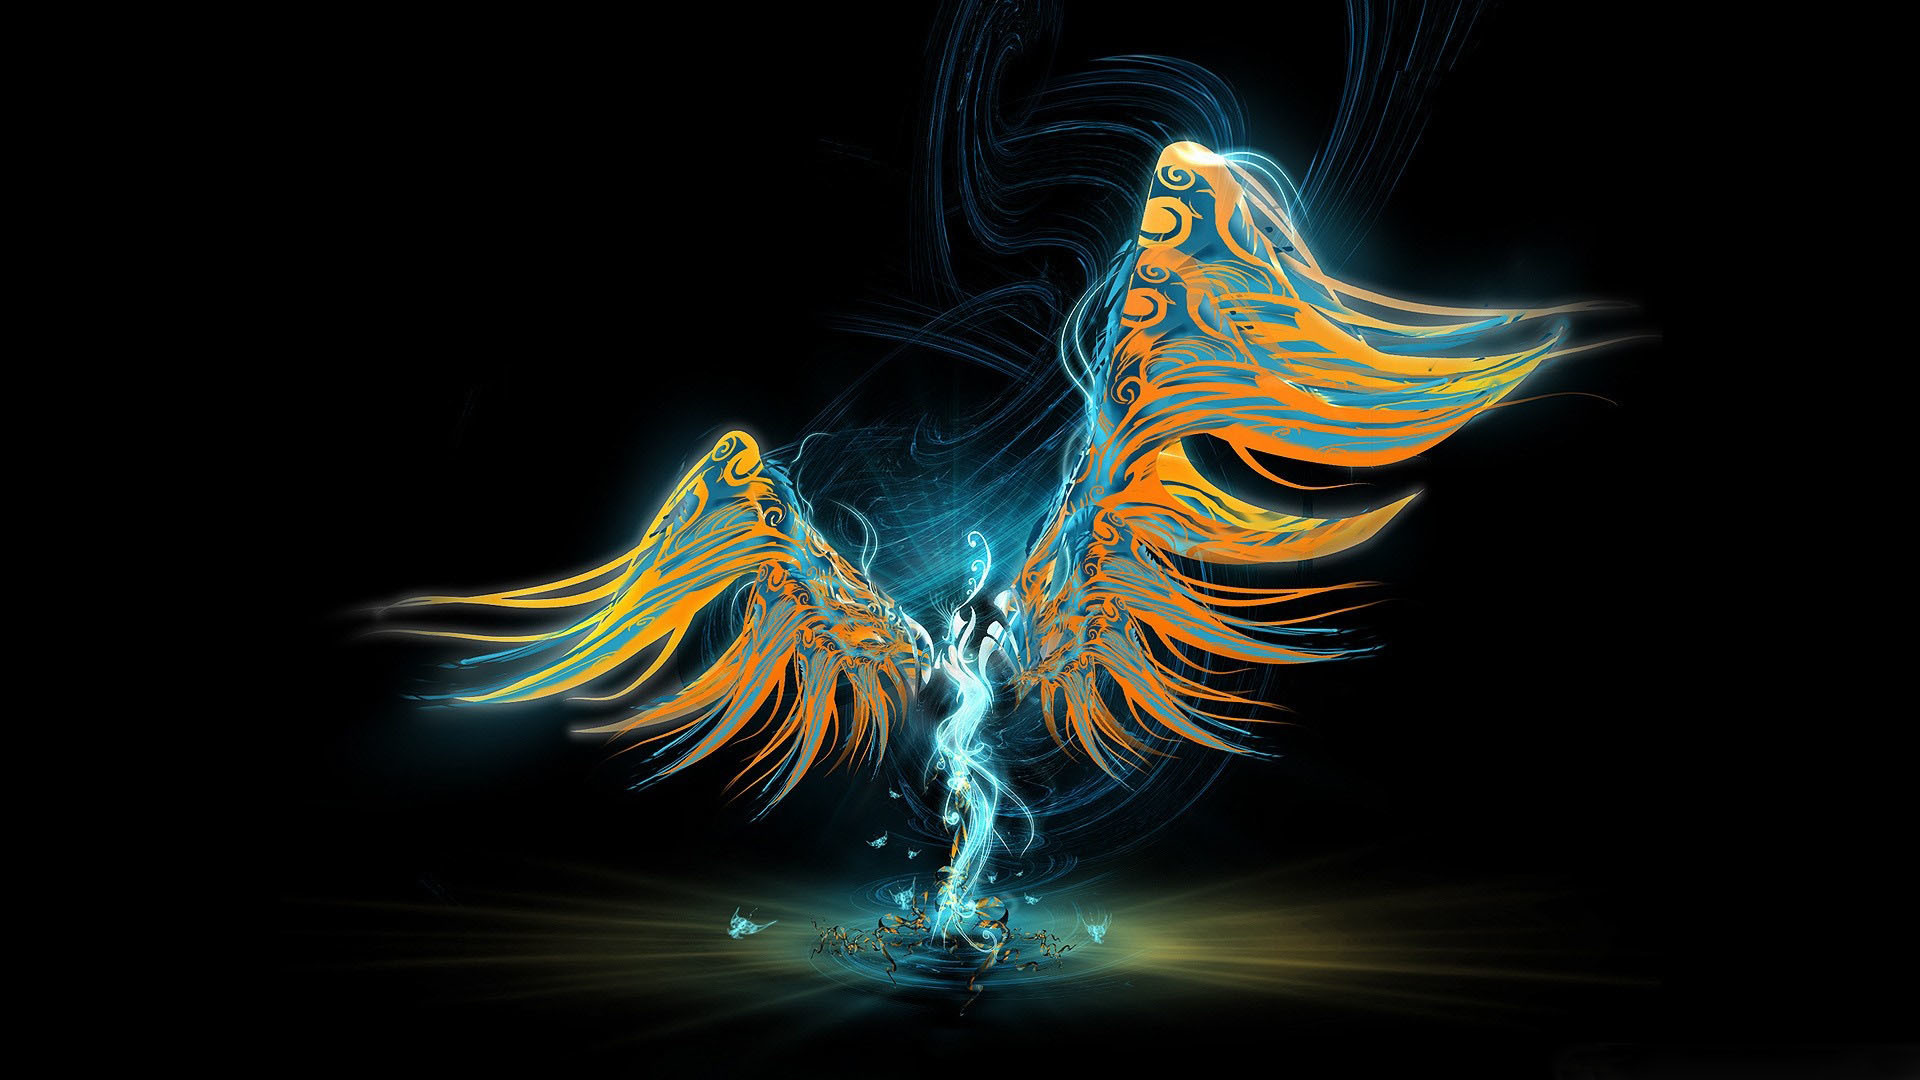 1920x1080 Cool 1080P HD Wallpapers. Cool Angel Abstract 1080p.